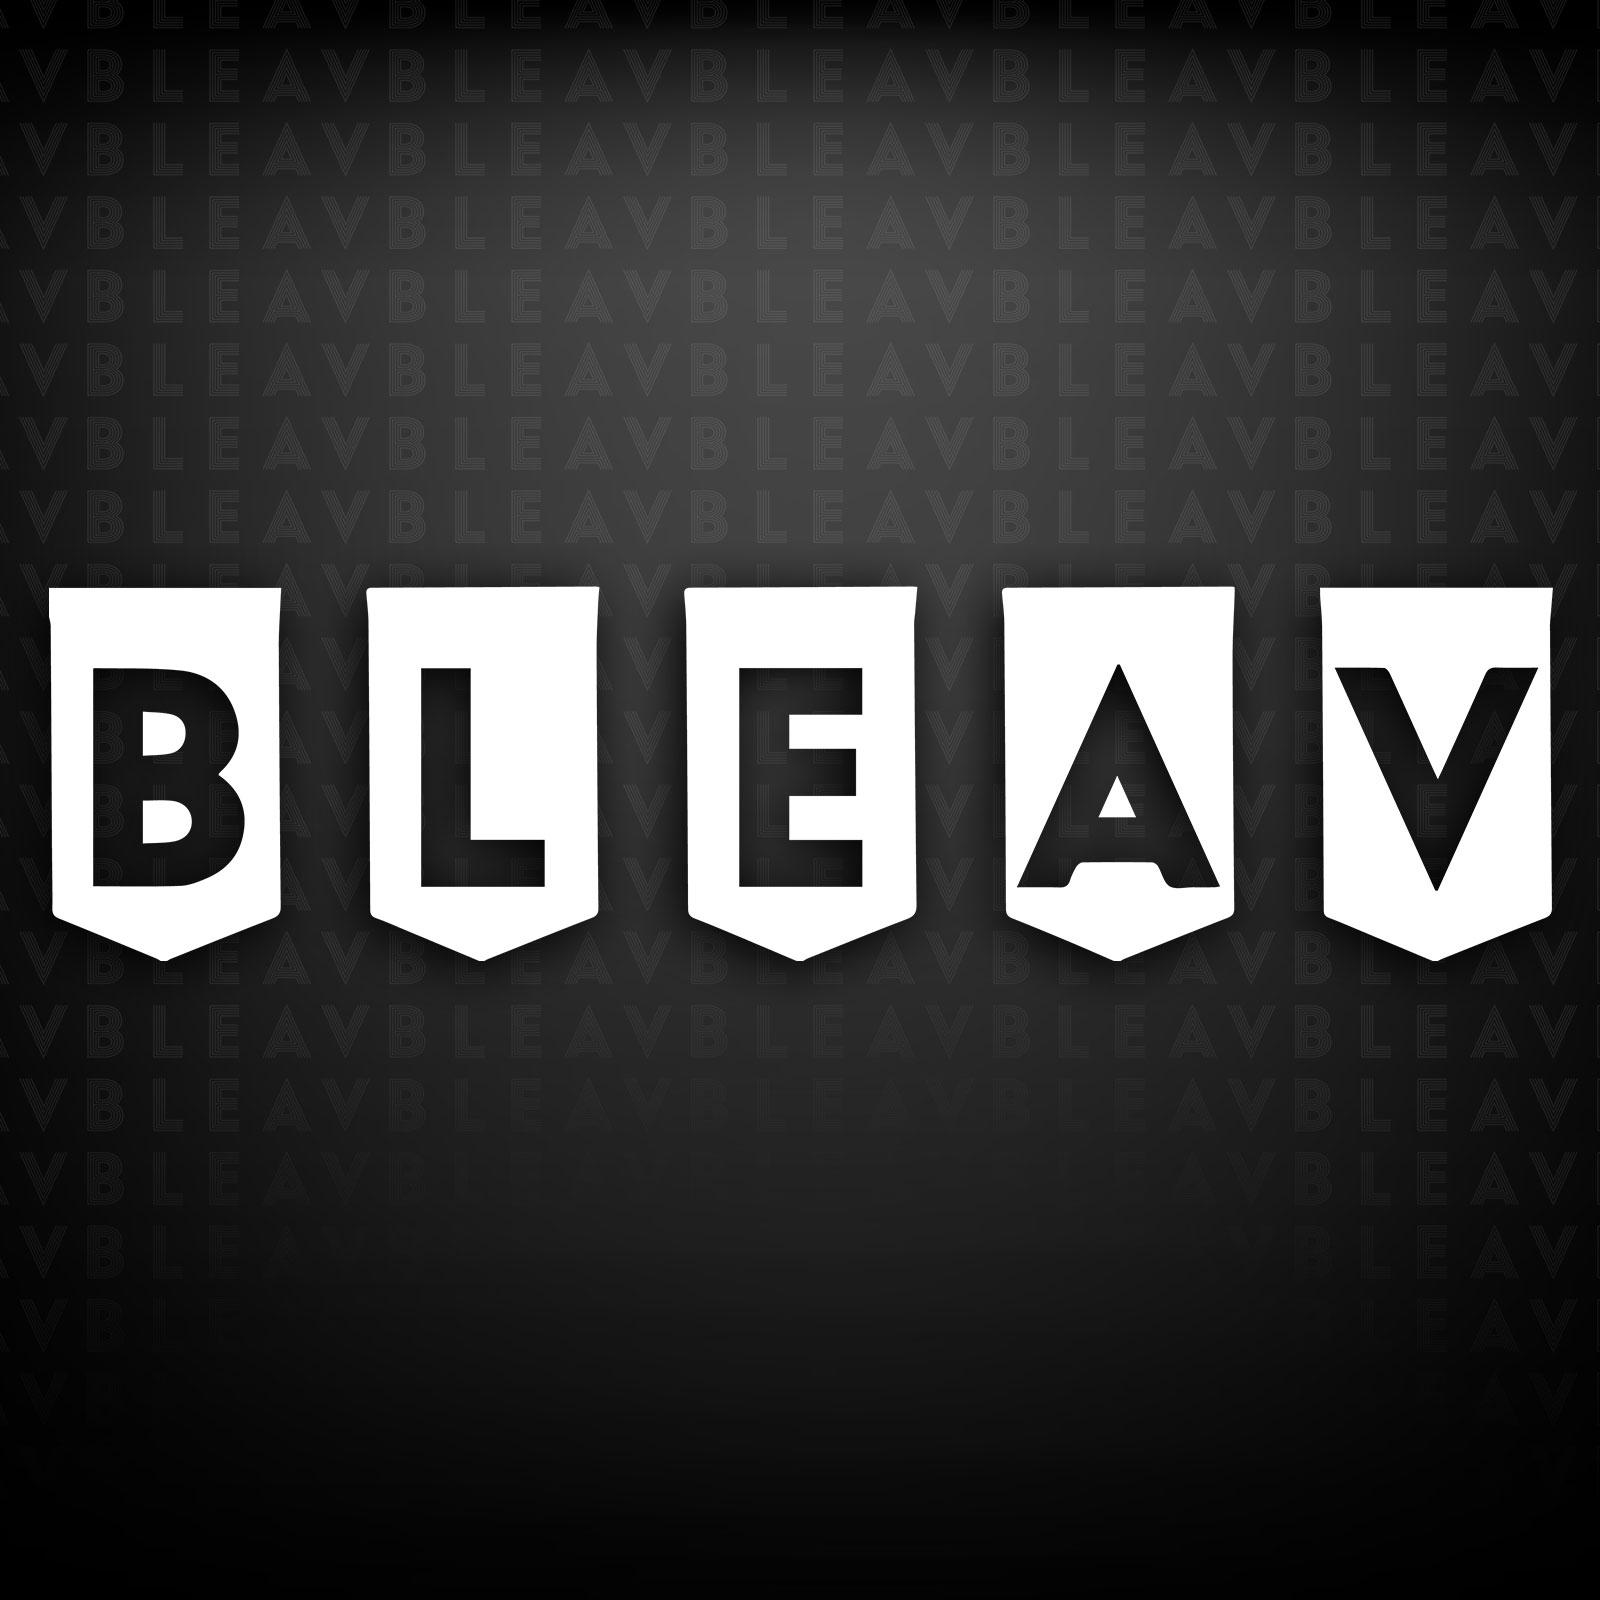 Bleav Joins the Cumulus Podcast Network